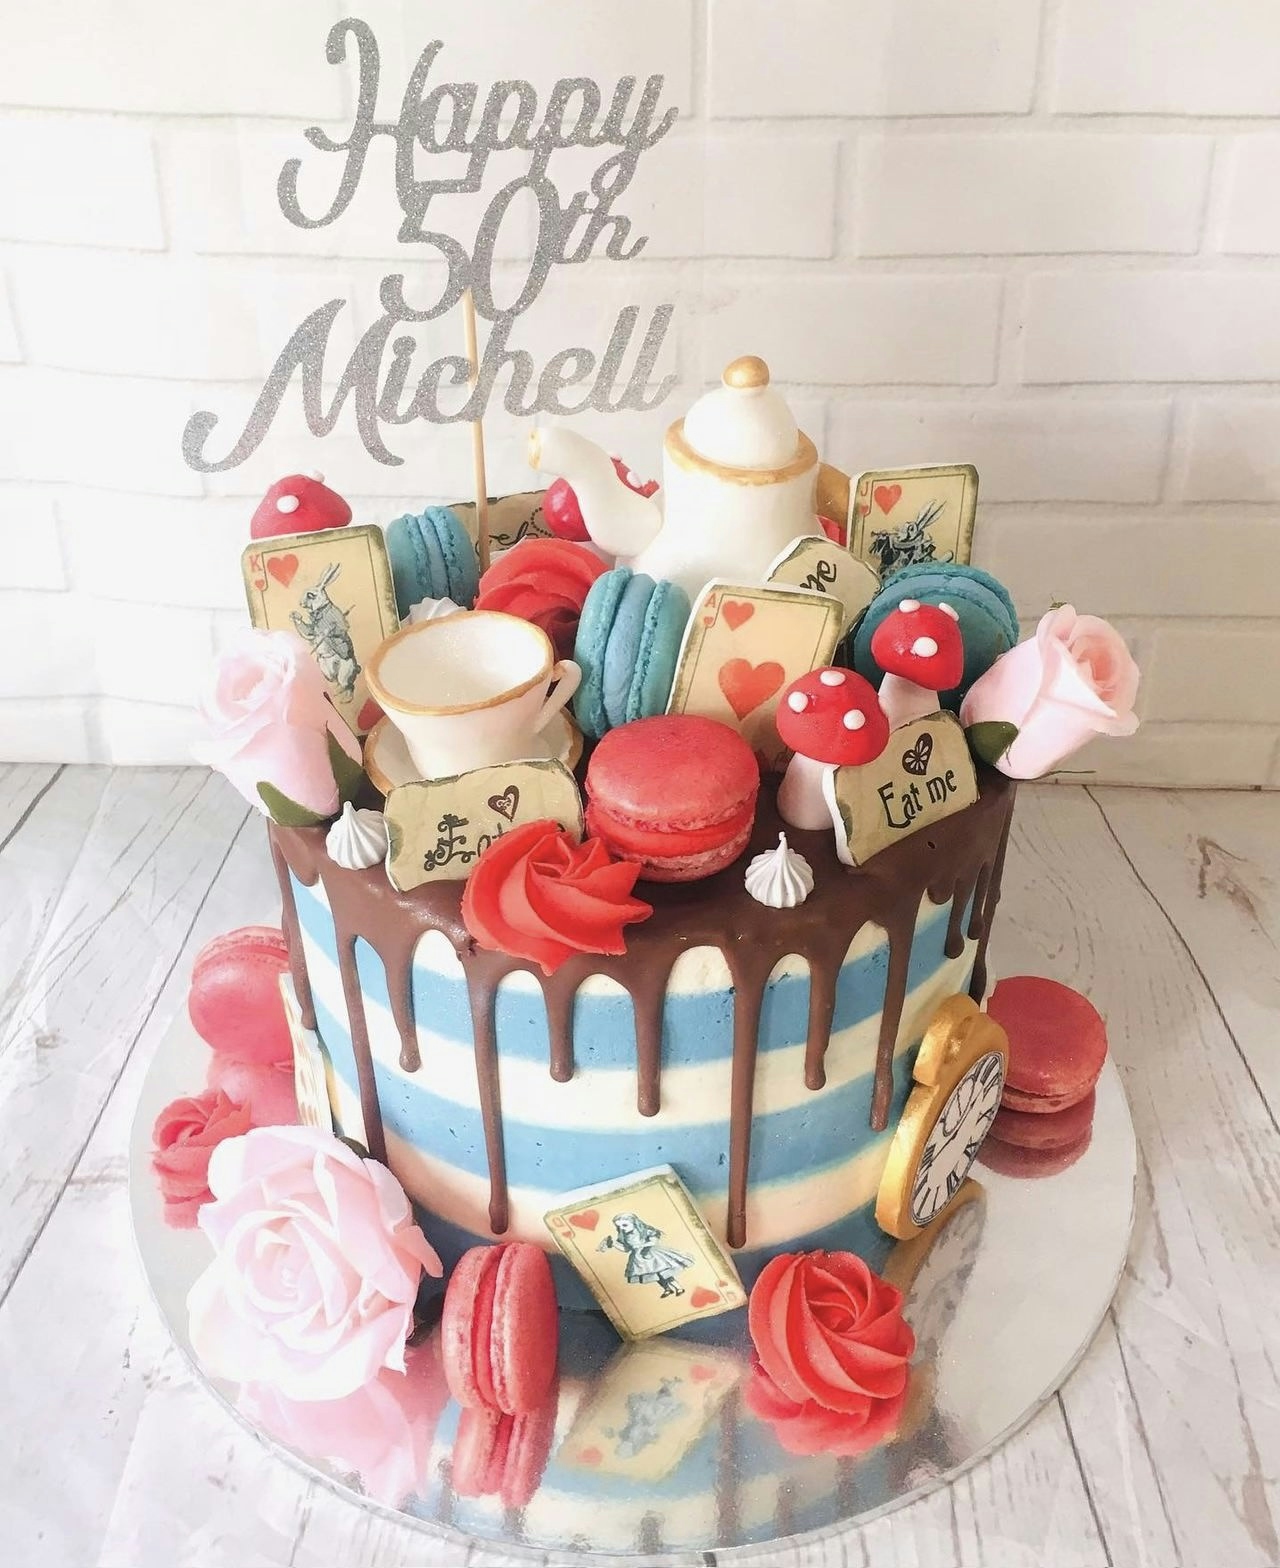 A birthday cake in the style of Alice in Wonderland